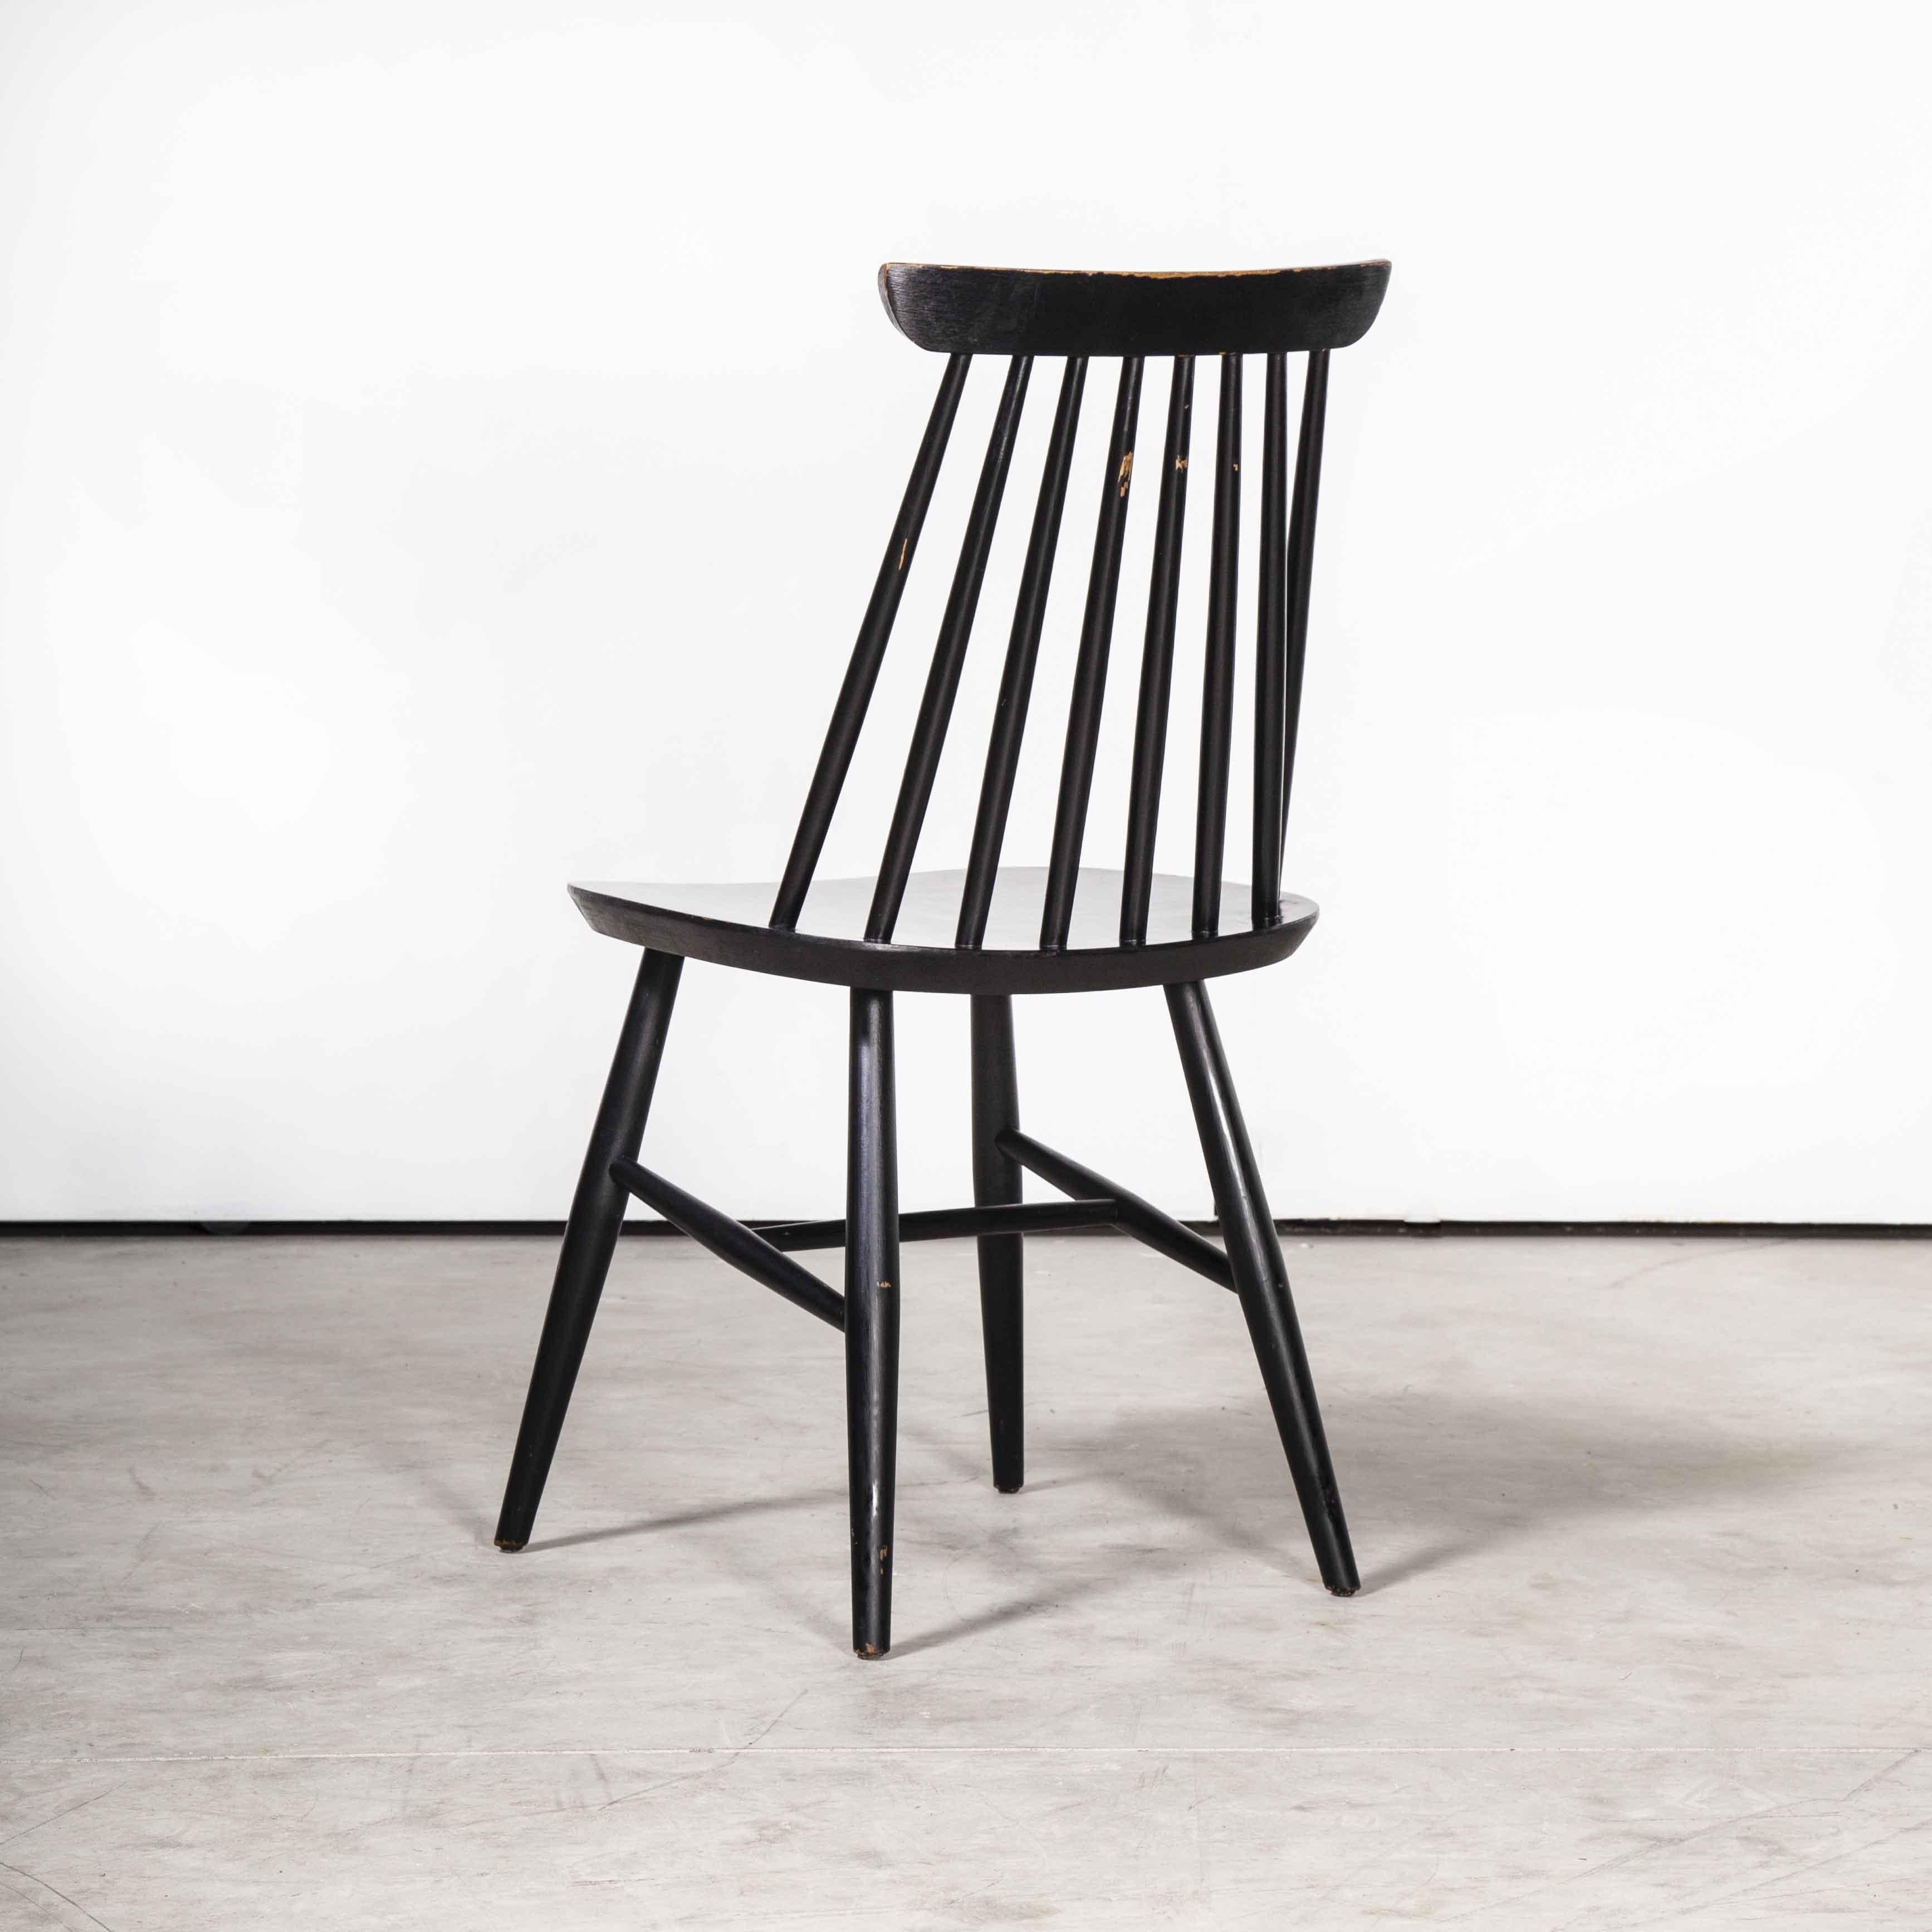 1950’s French ebonised stick back dining chairs – set of four
1950’s French ebonised stick back dining chairs – set of four. A classic design born in the fifties and produced in variation through Europe to this day. This is a good strong set of